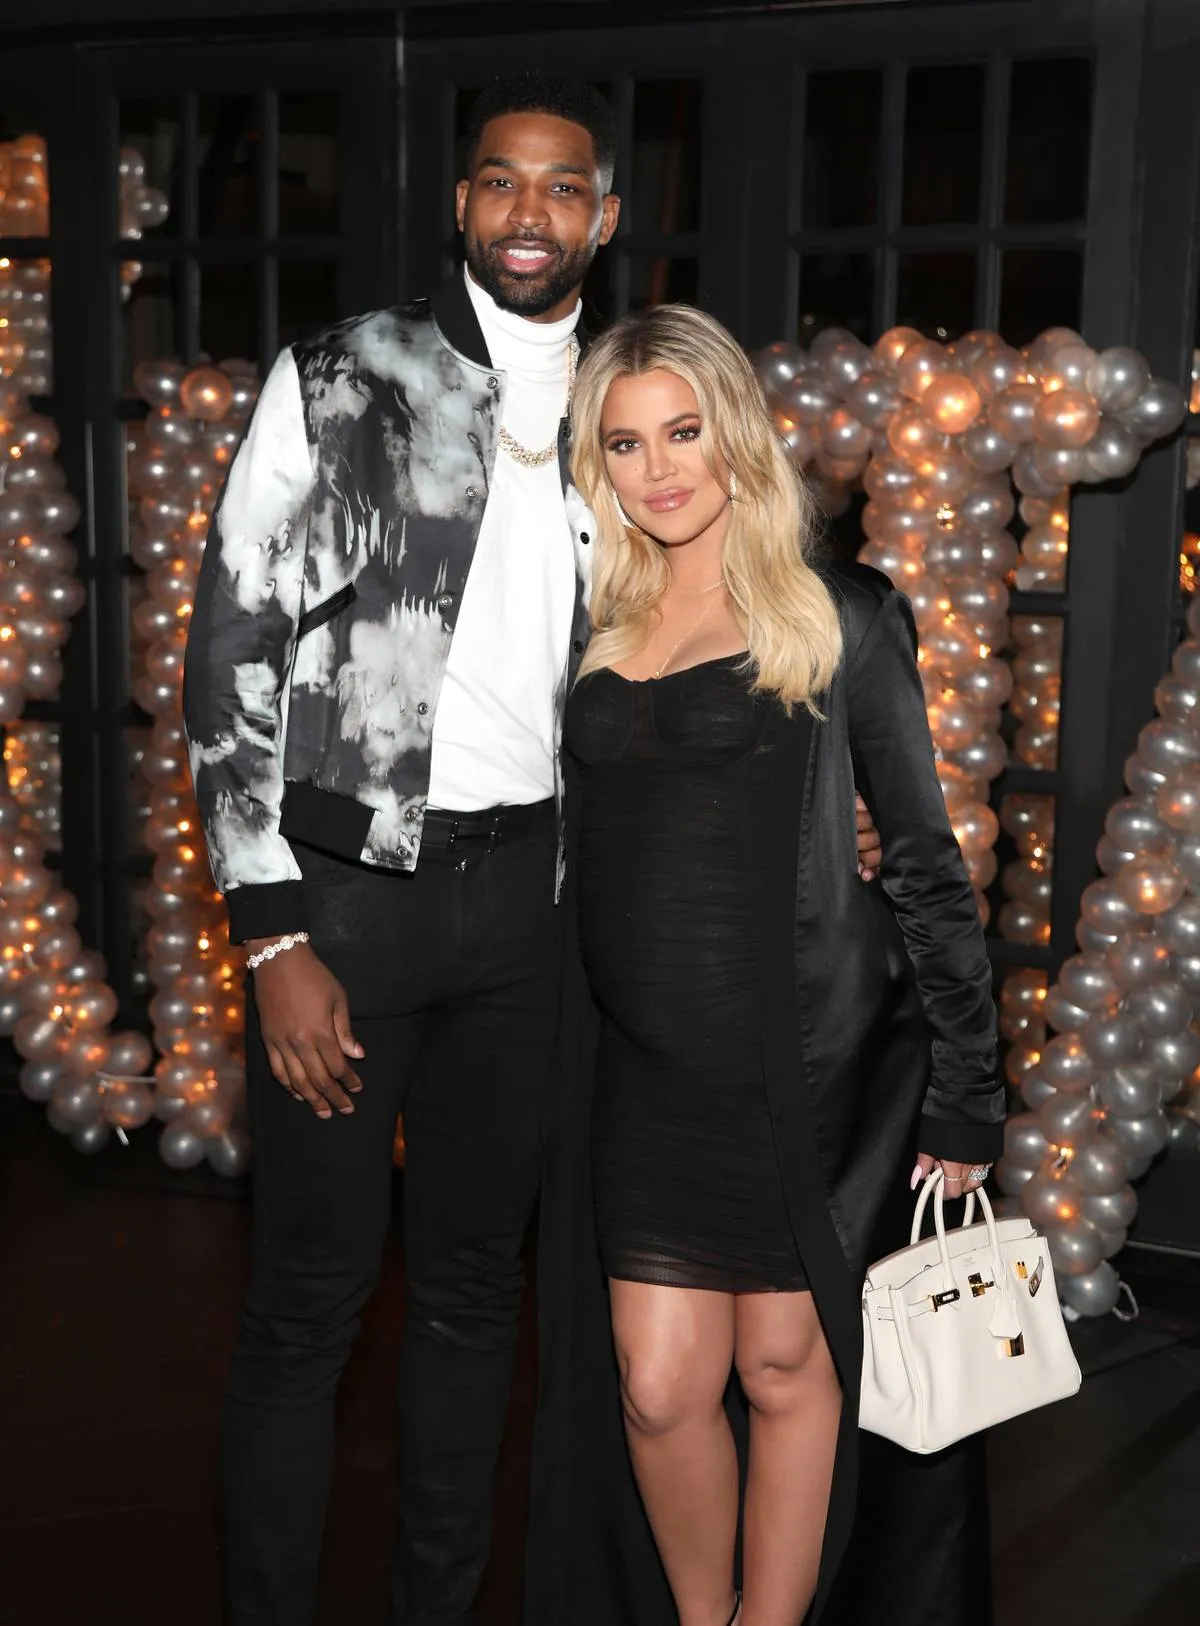 Khloe Kardashian Didn't Want To Go On A Blind Date With Tristan Thompson